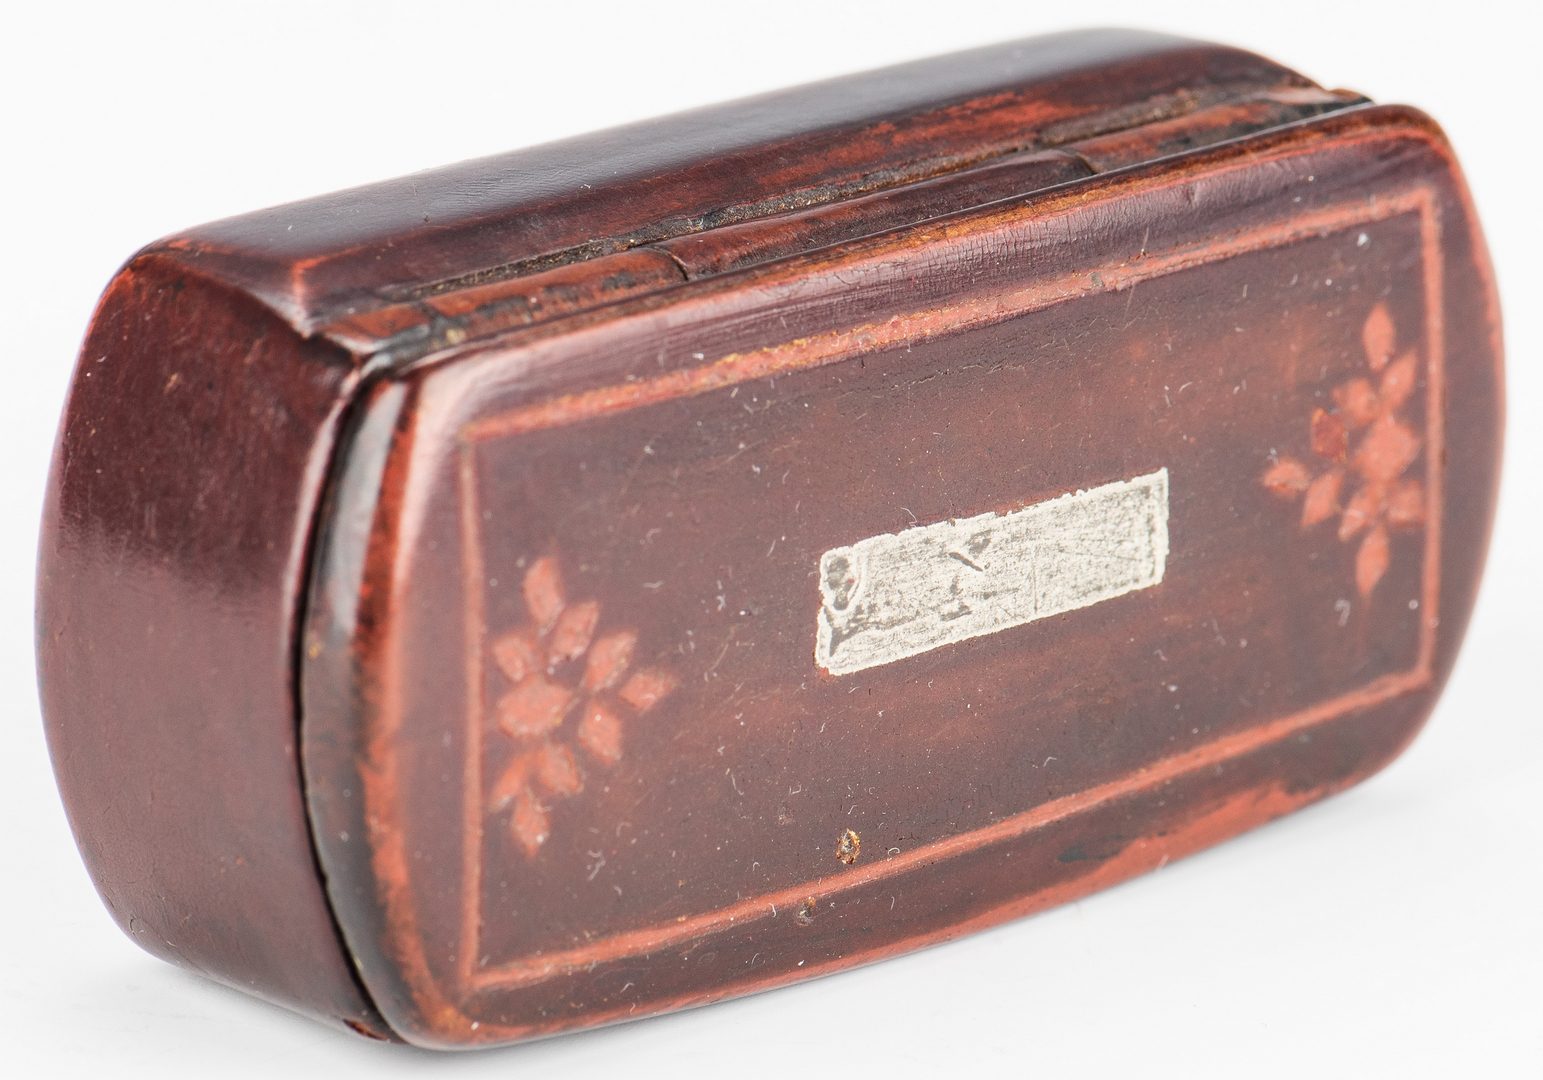 Lot 172: Collection of 6 burlwood snuff boxes